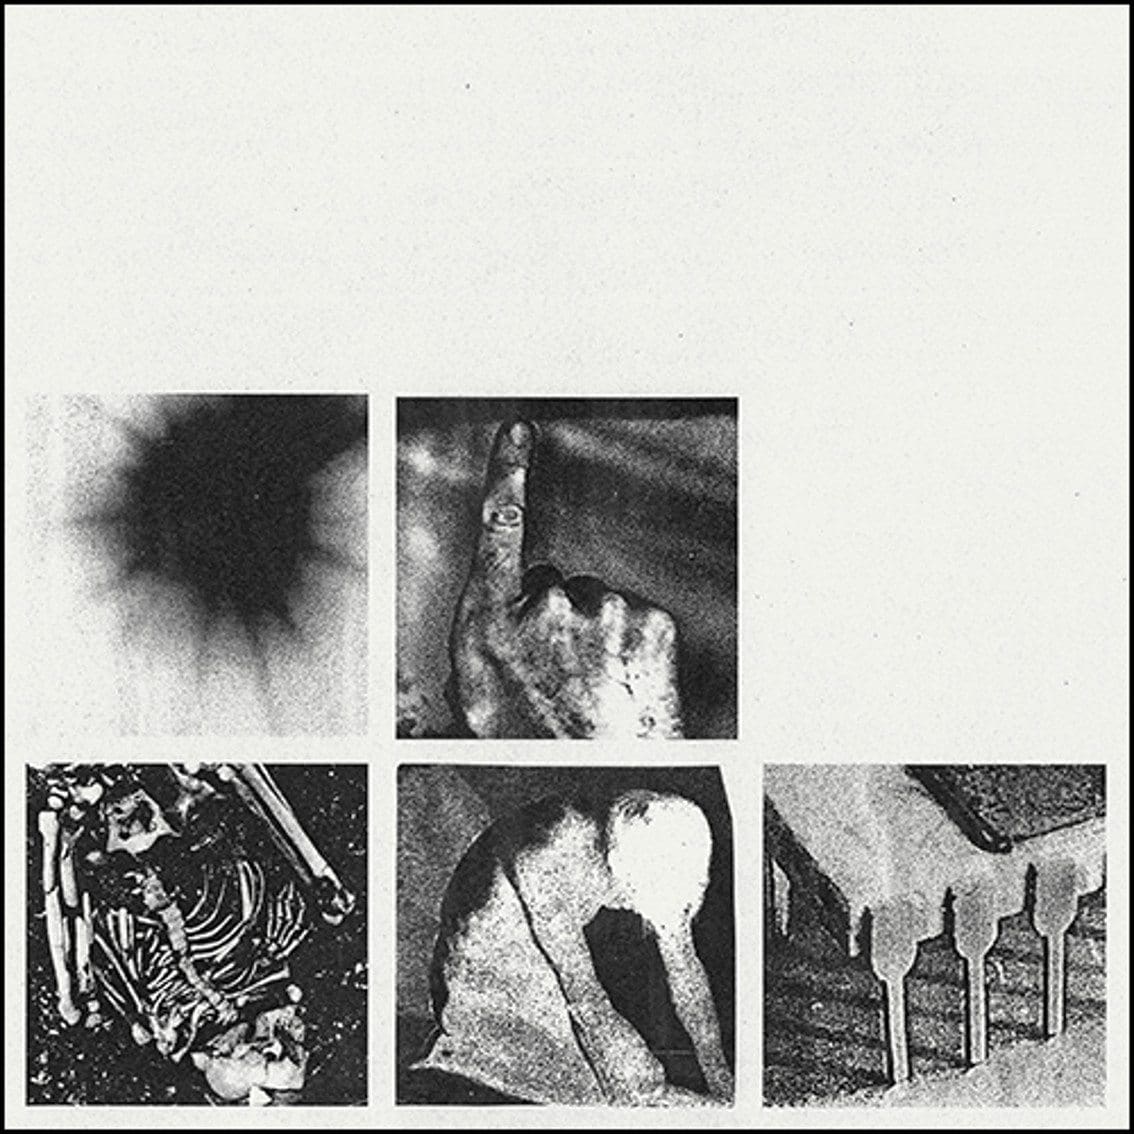 Check out teaser new Nine Inch Nails album 'Bad Witch' - order it here on CD and vinyl